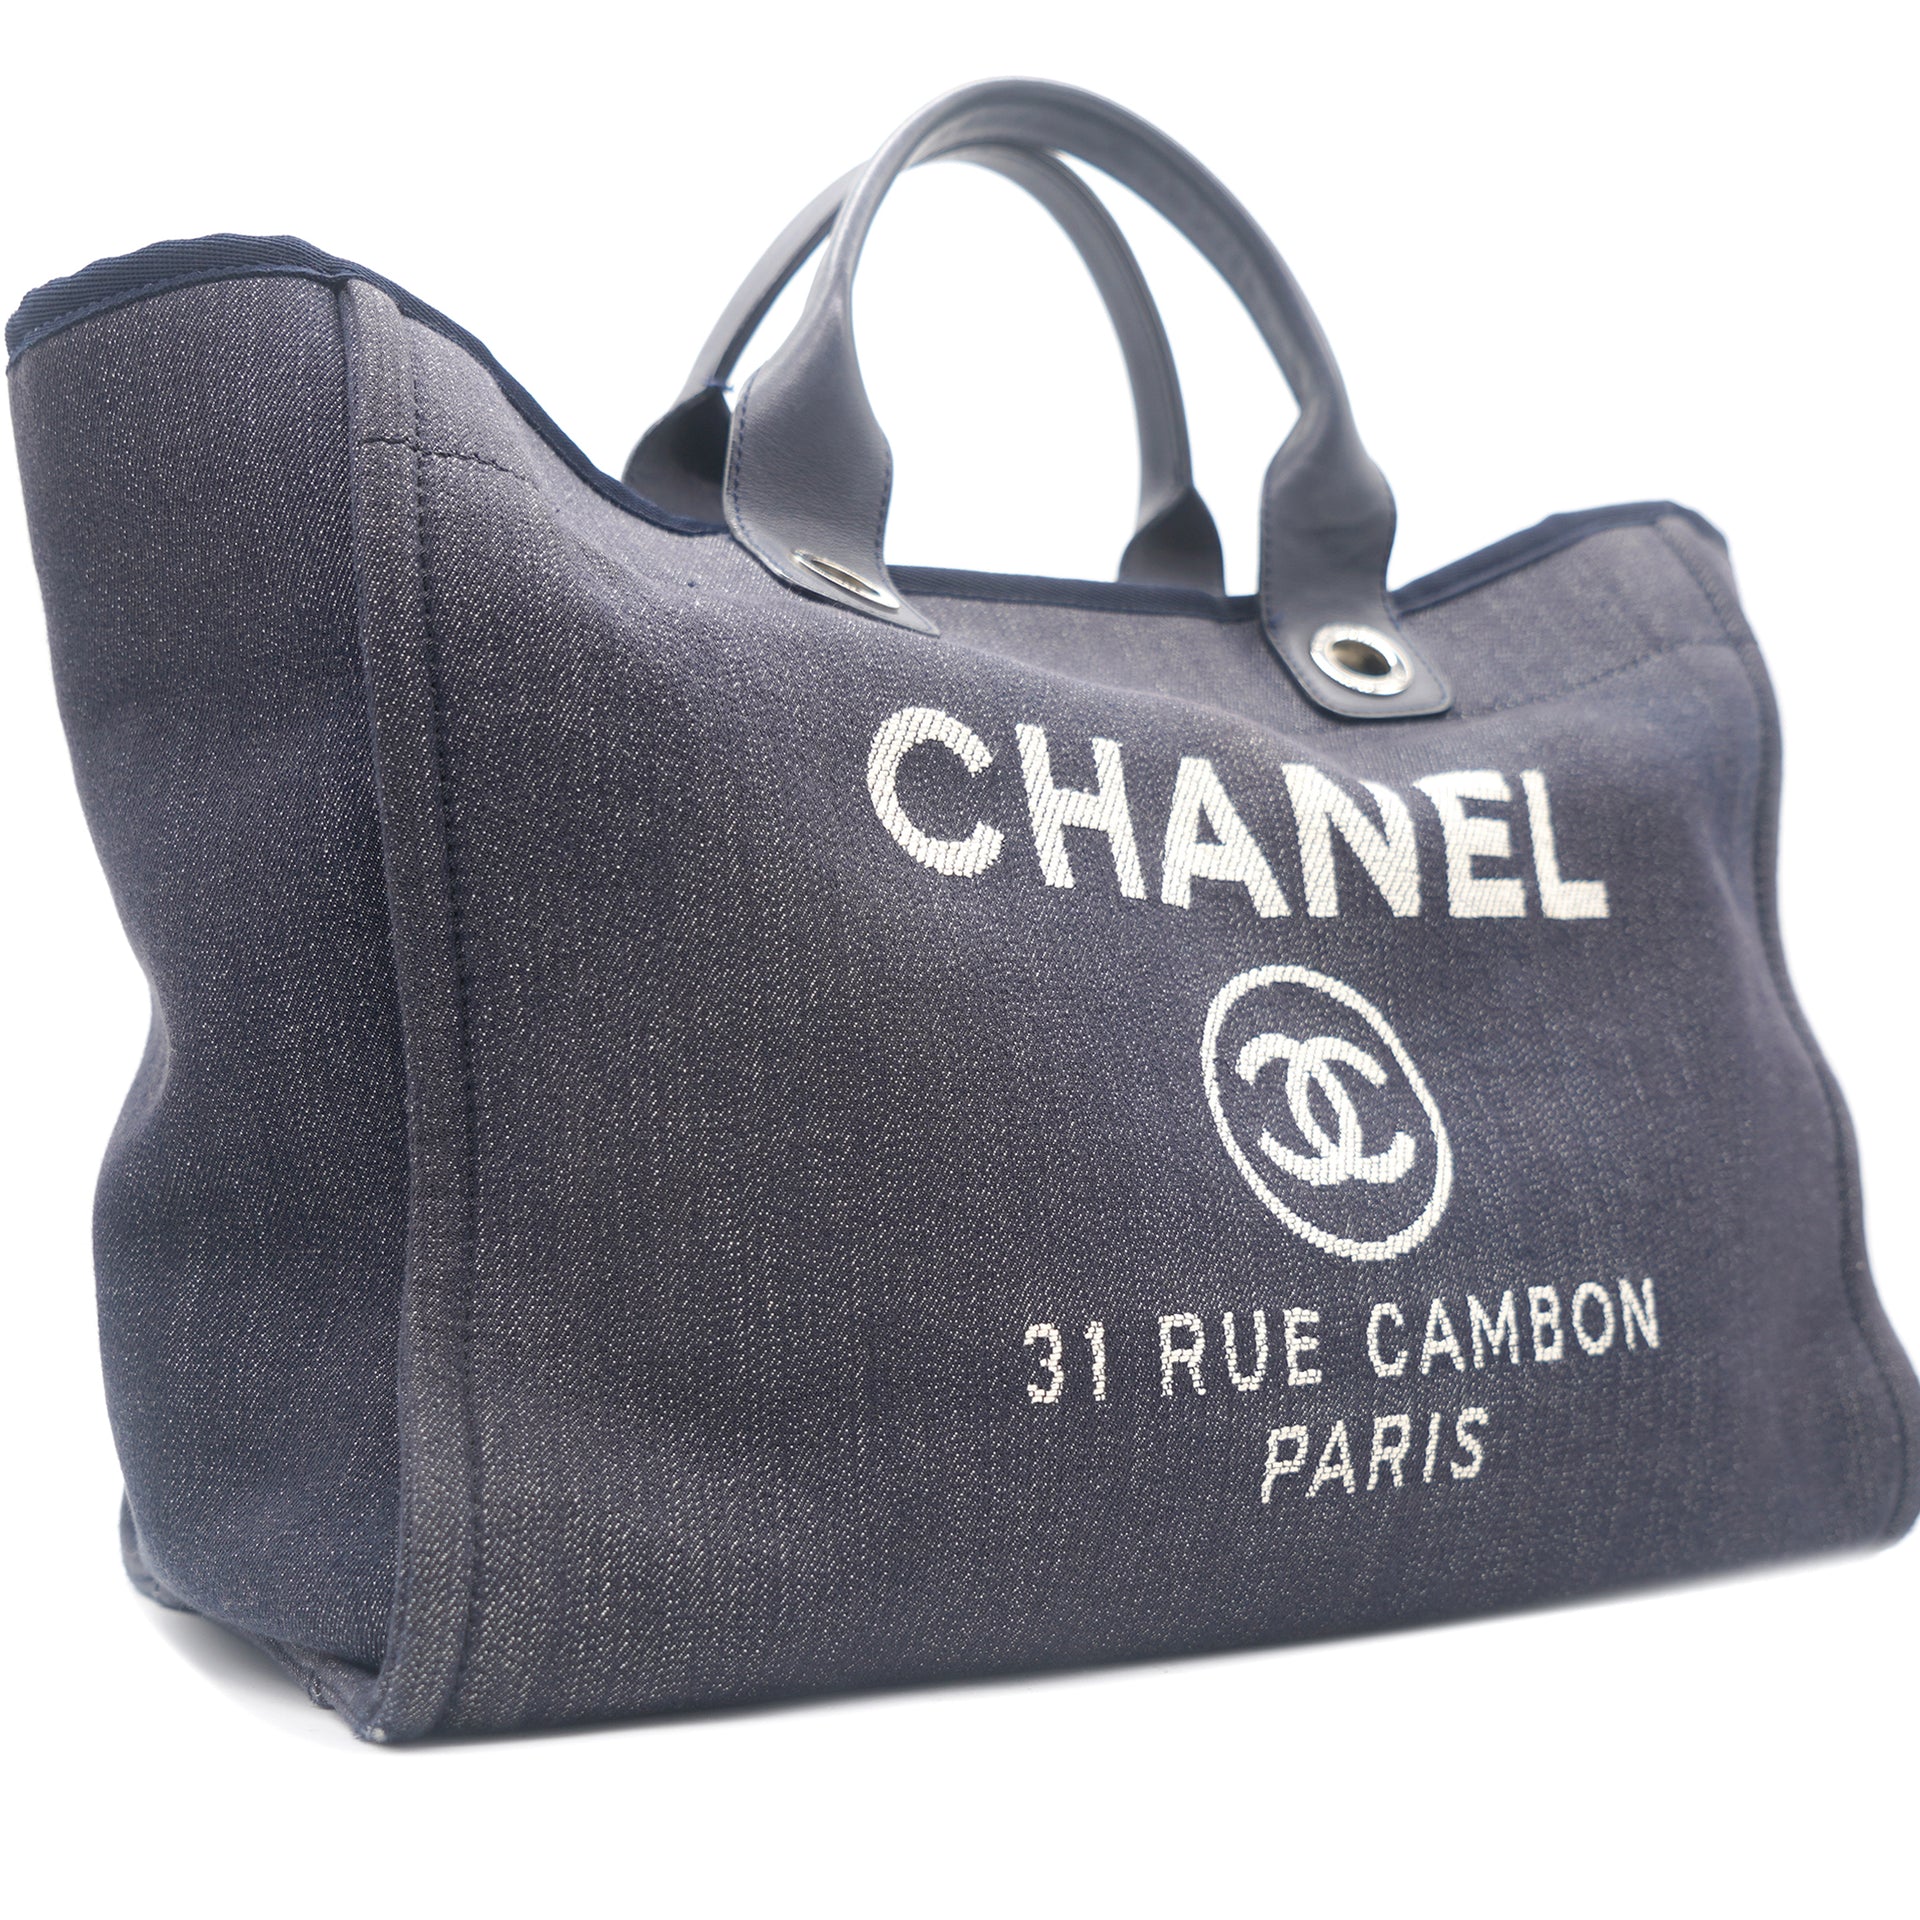 Chanel Grey & Black Canvas Large Deauville Tote in Metallic